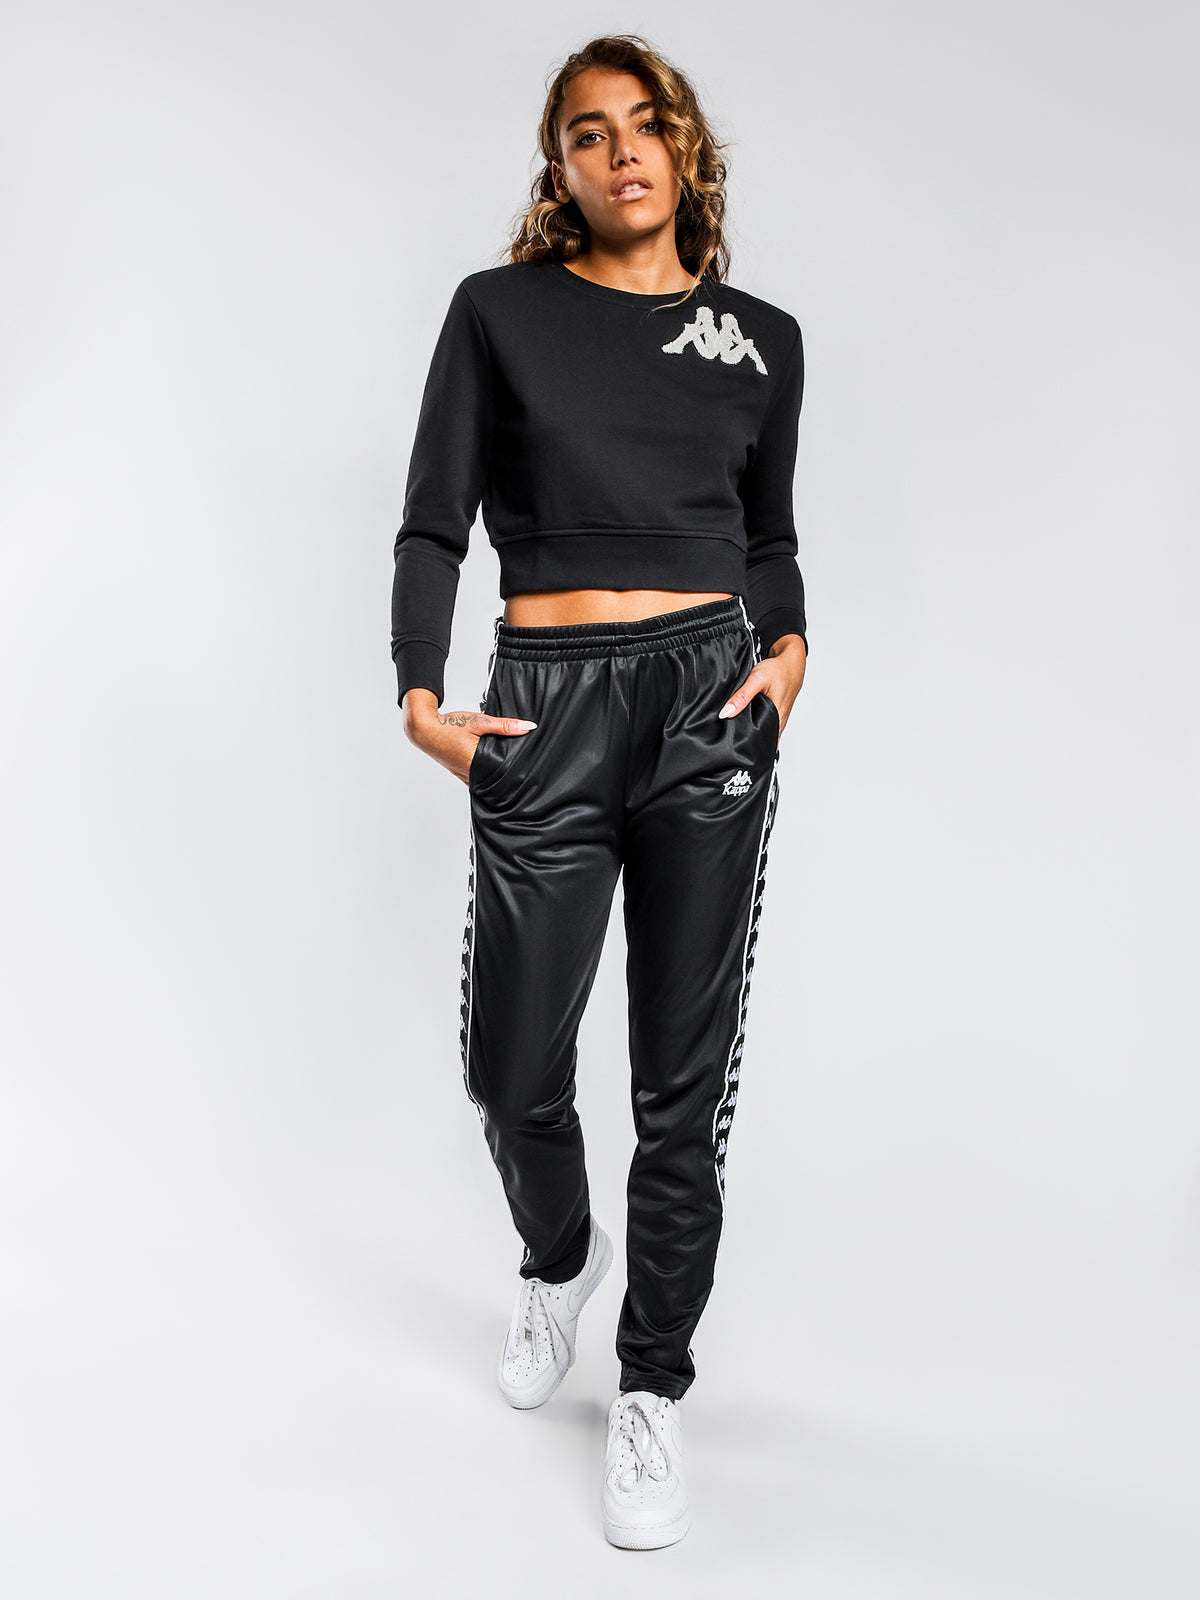 Authentic Bassy Cropped Jumper in Black